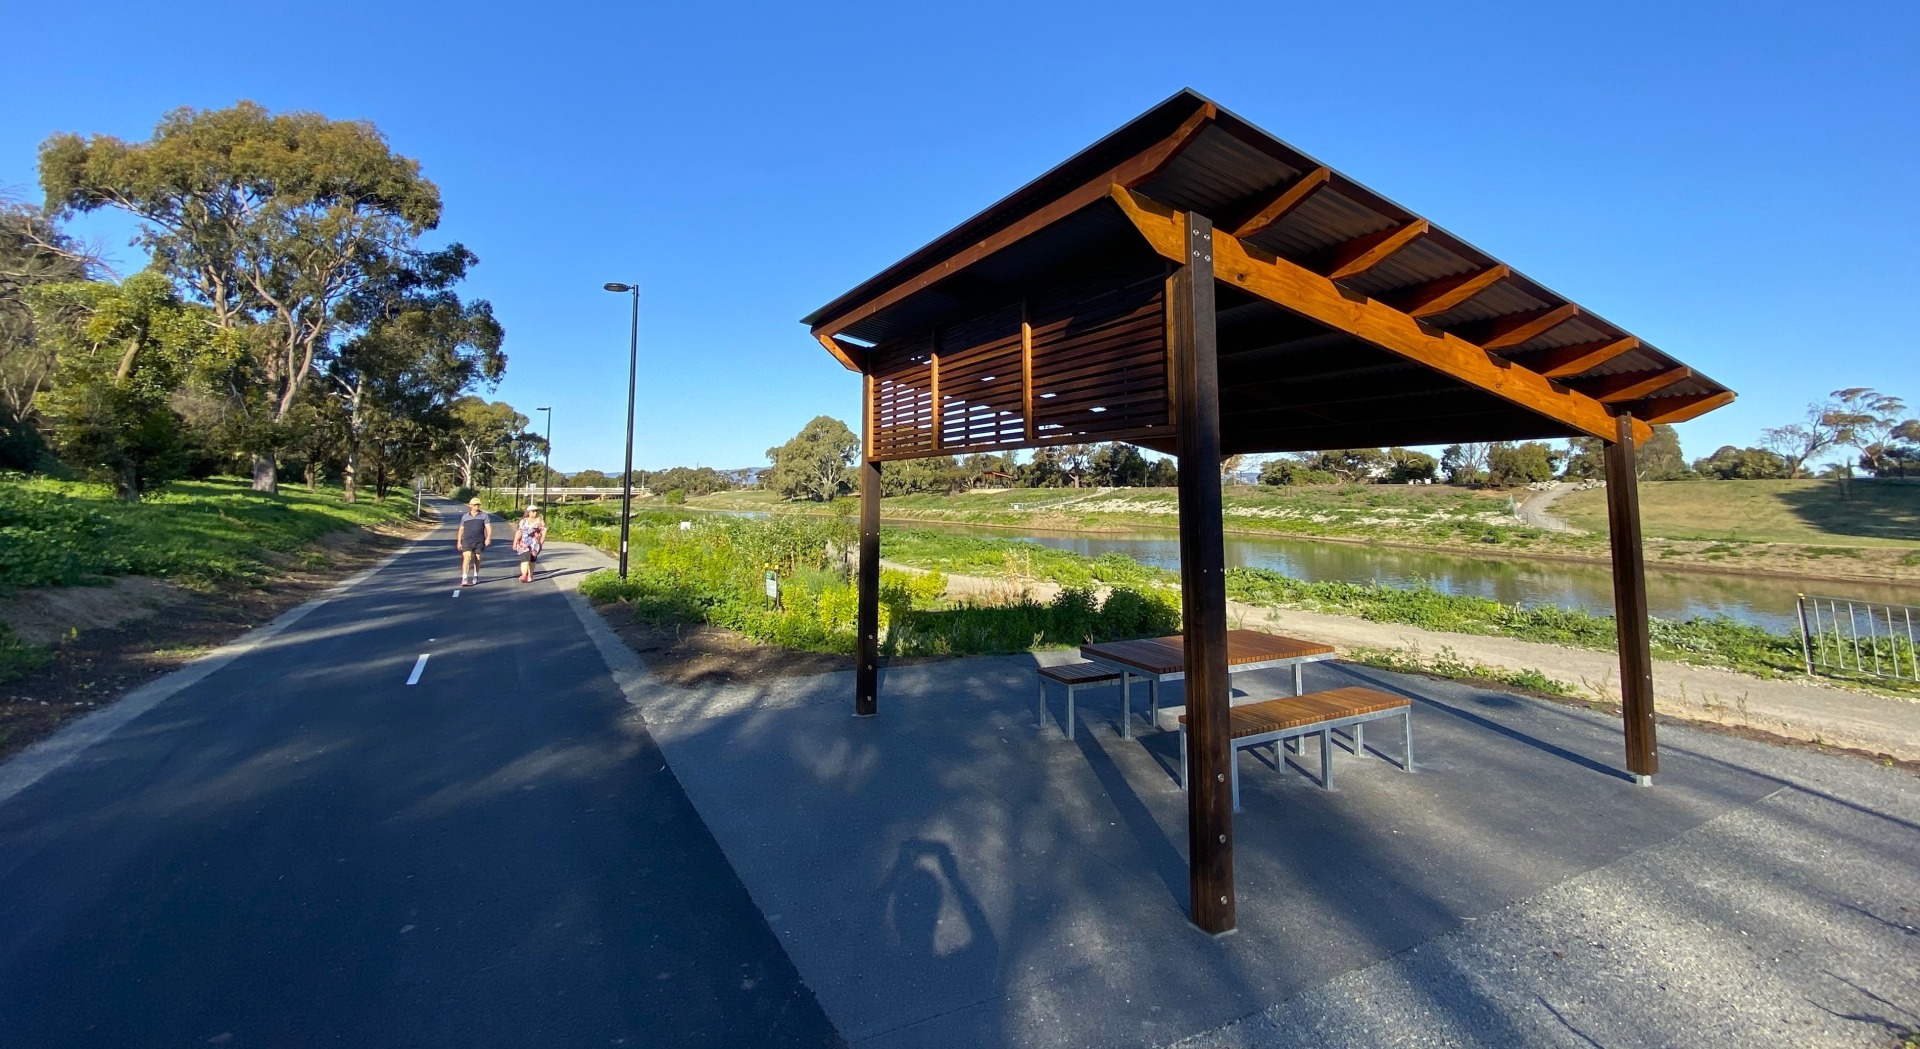 New shelters provide resting places and lookouts. Image: RAA